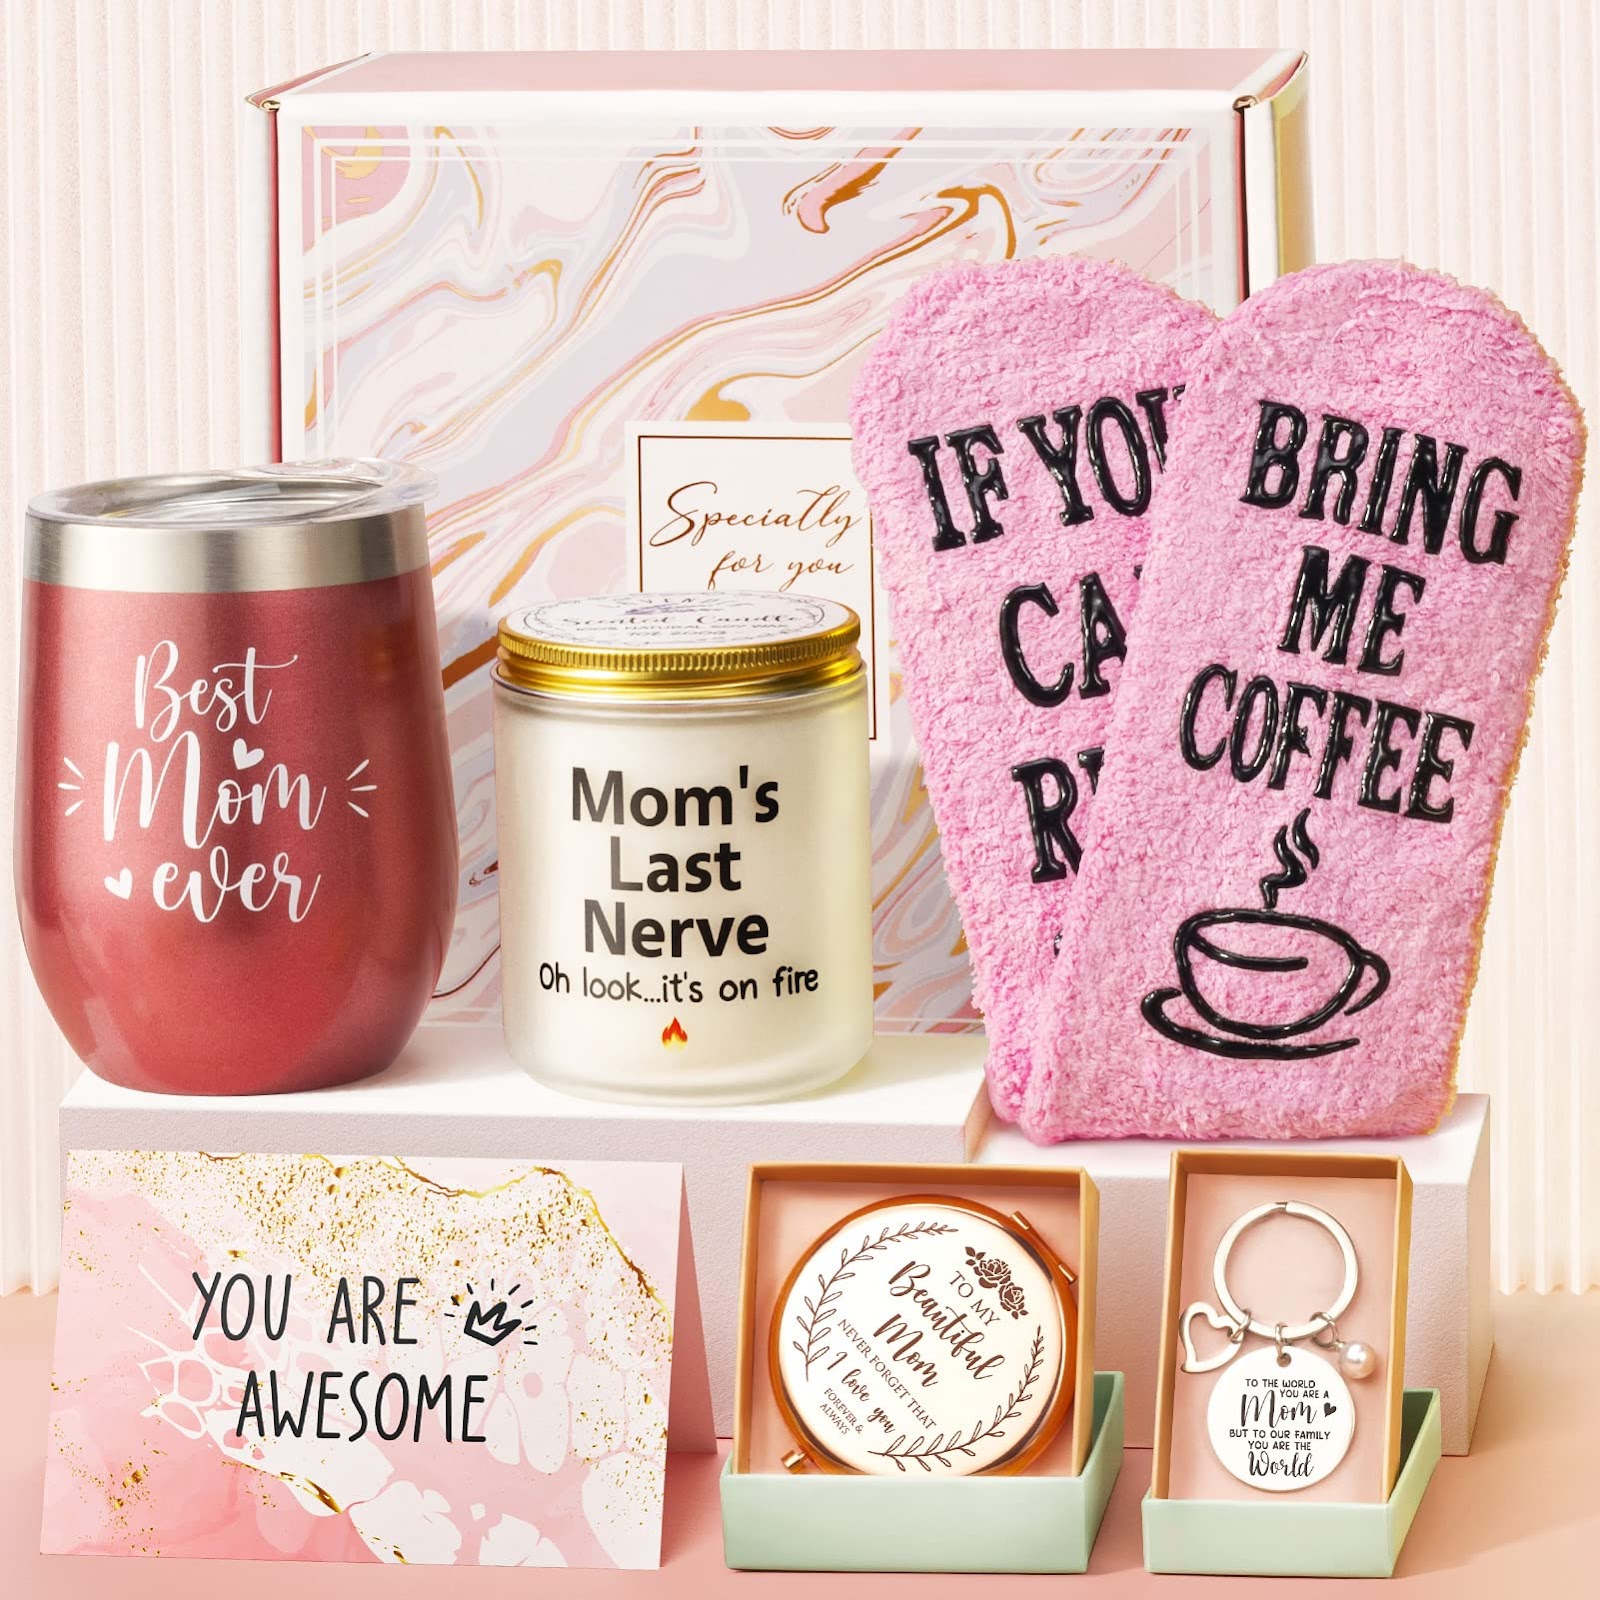 21 Best Christmas Gift Ideas for Moms from Daughters - Crafting a